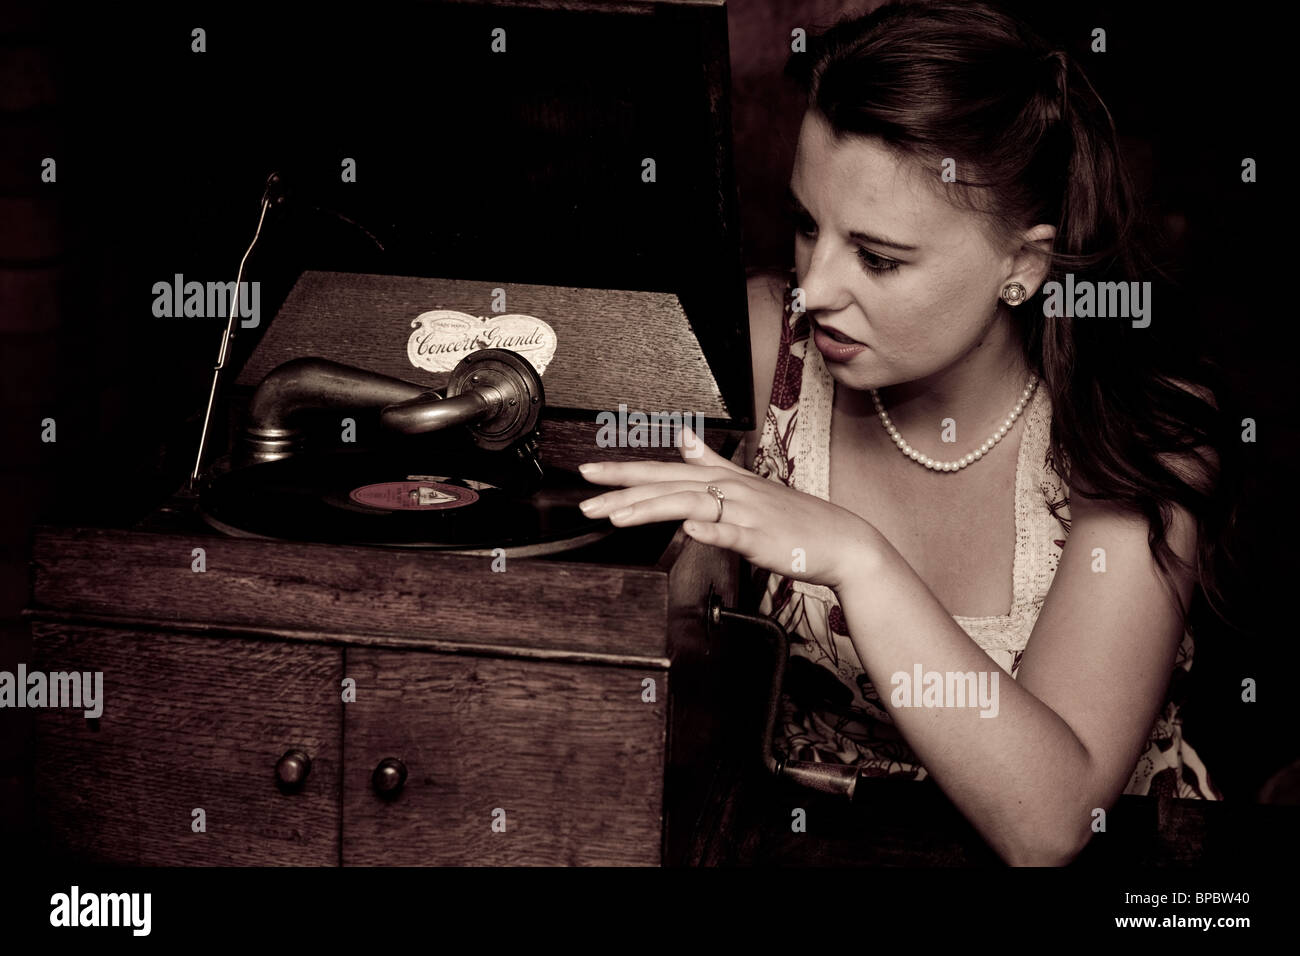 Woman with a gramophone player in a cottage shot in a vintage 1940 style Stock Photo